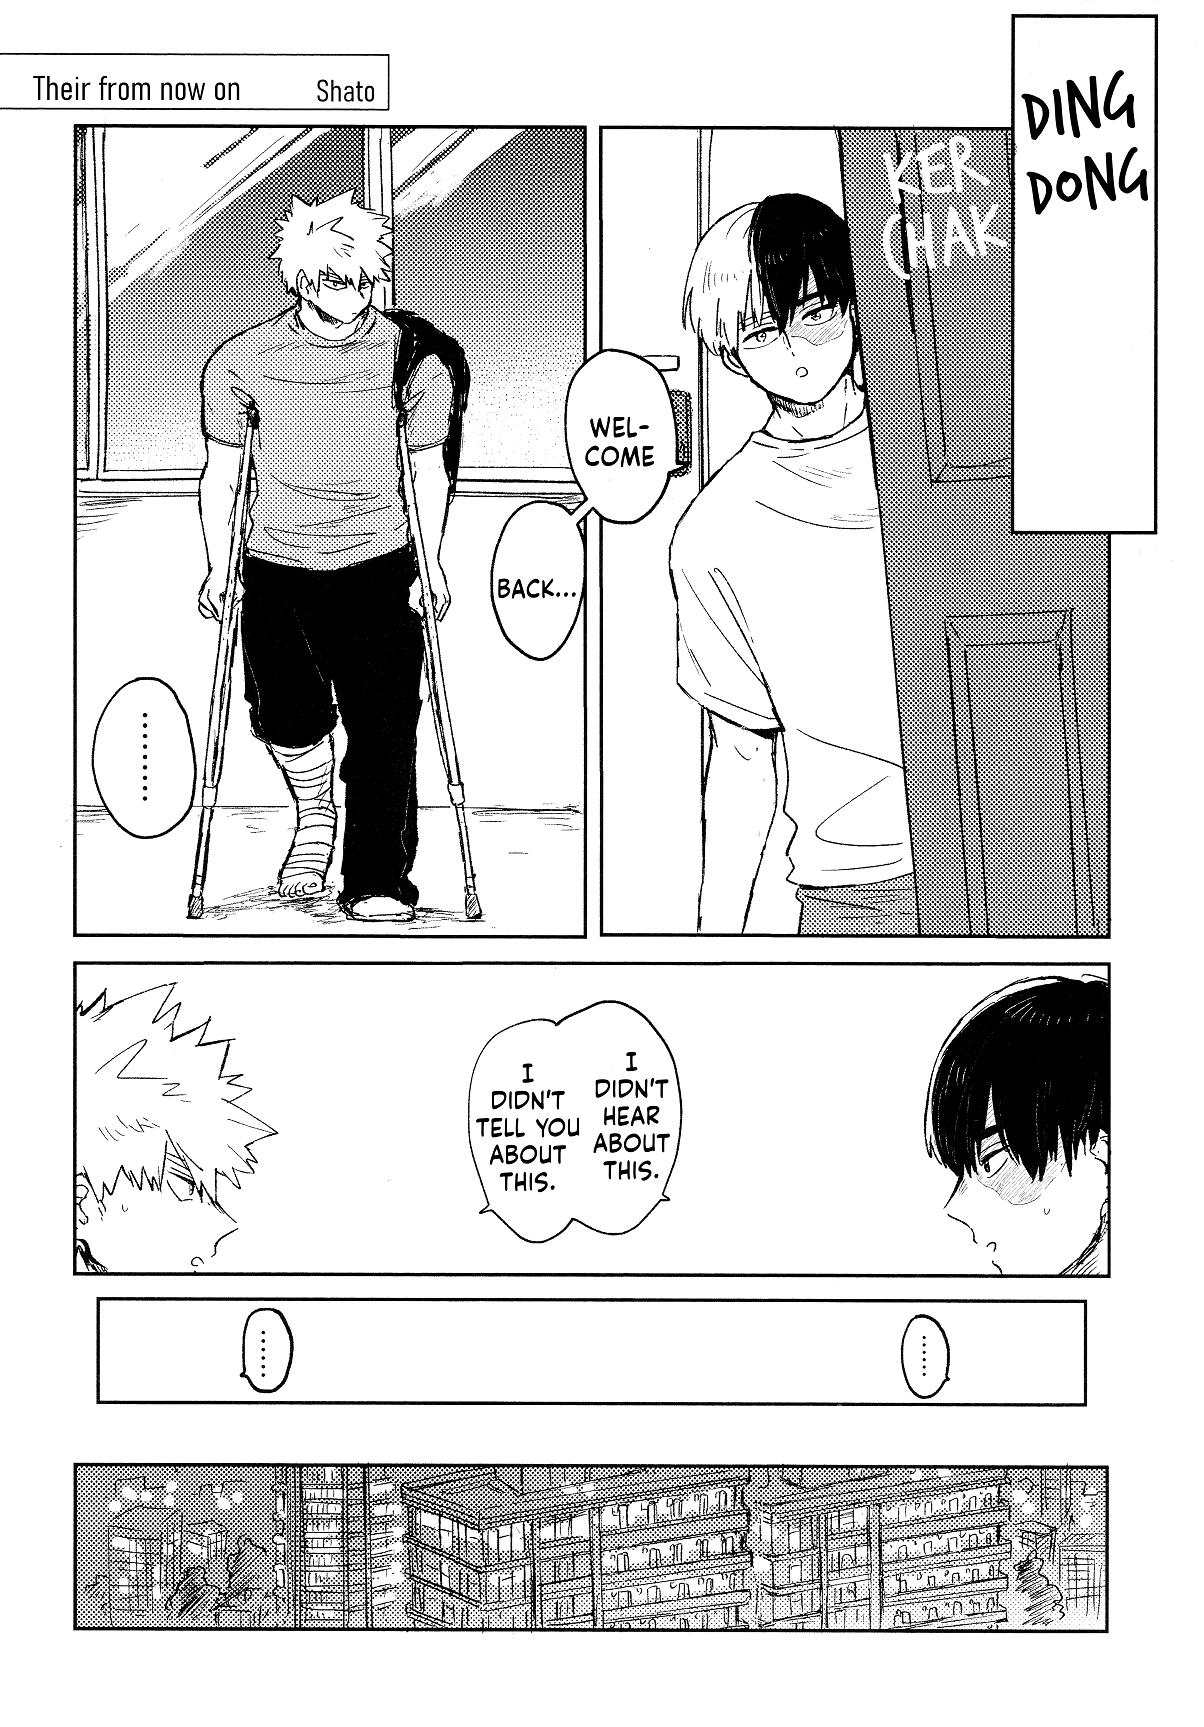 Cheers! - Shouto X Katsuki Marriage Anthology Vol.1 Chapter 16: Their From Now On - Picture 2